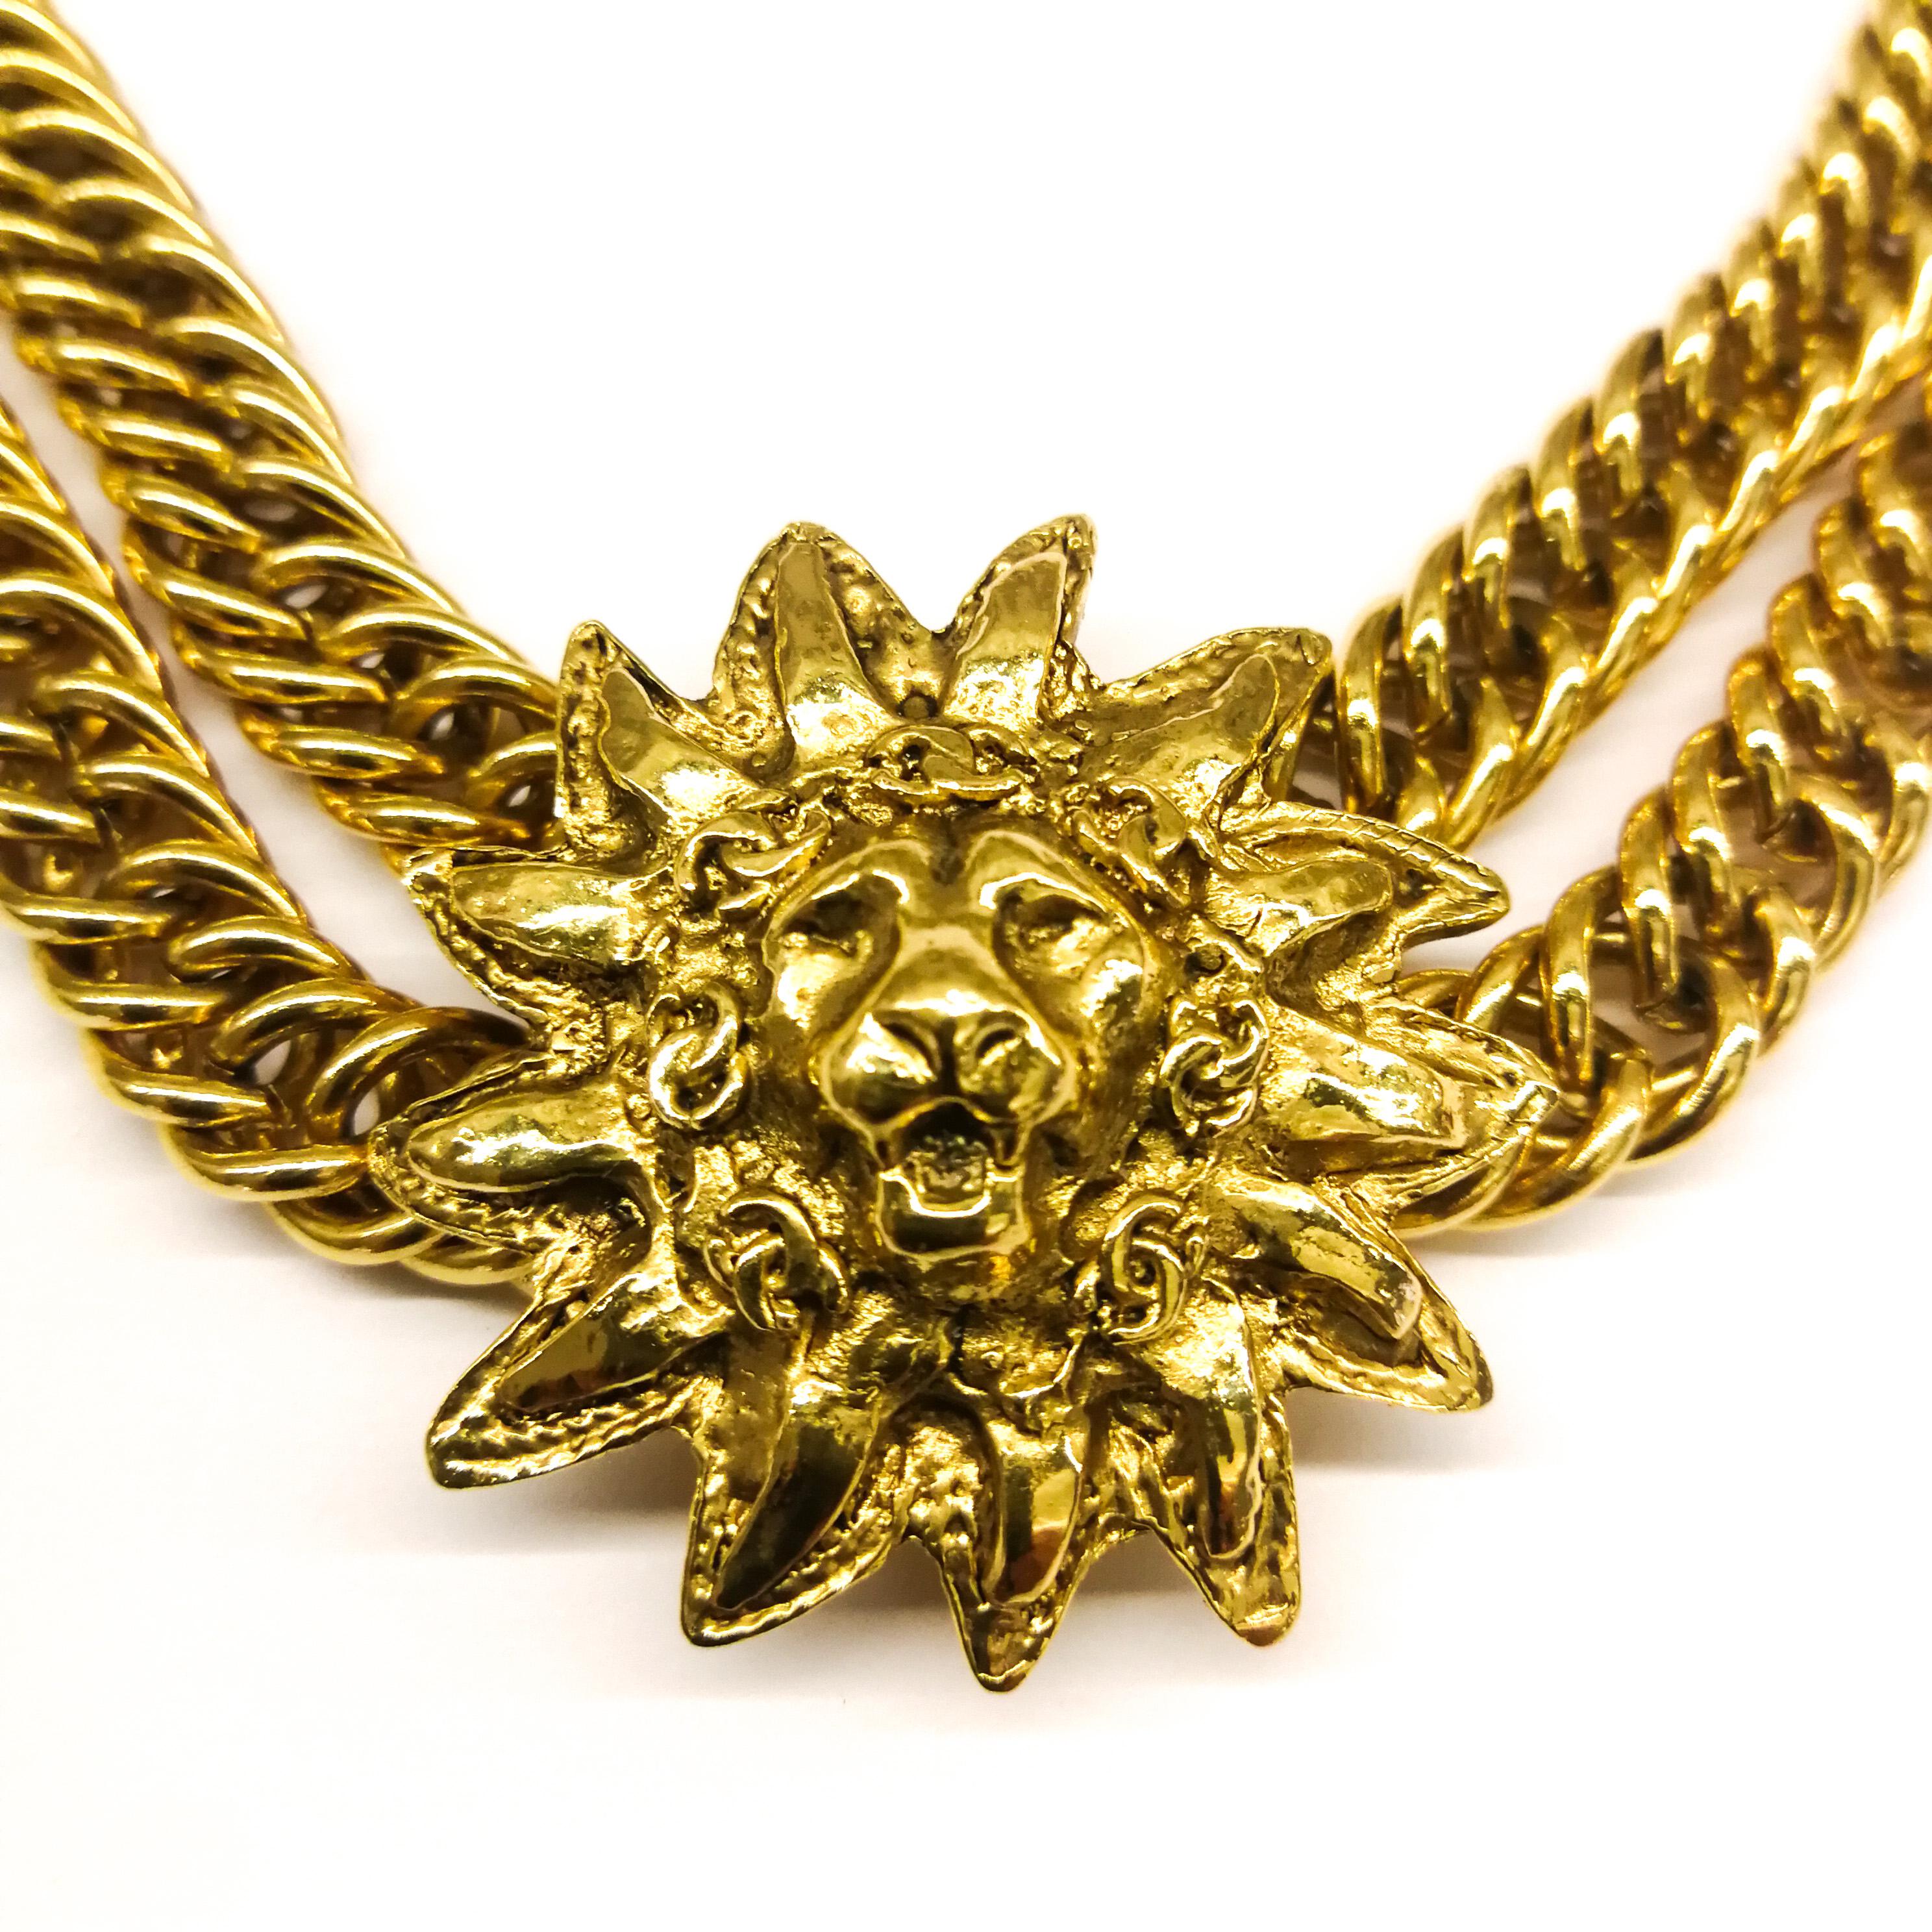 Baroque Gilt double row chain necklace, with iconic 'lion head' motif , Chanel, 1980s